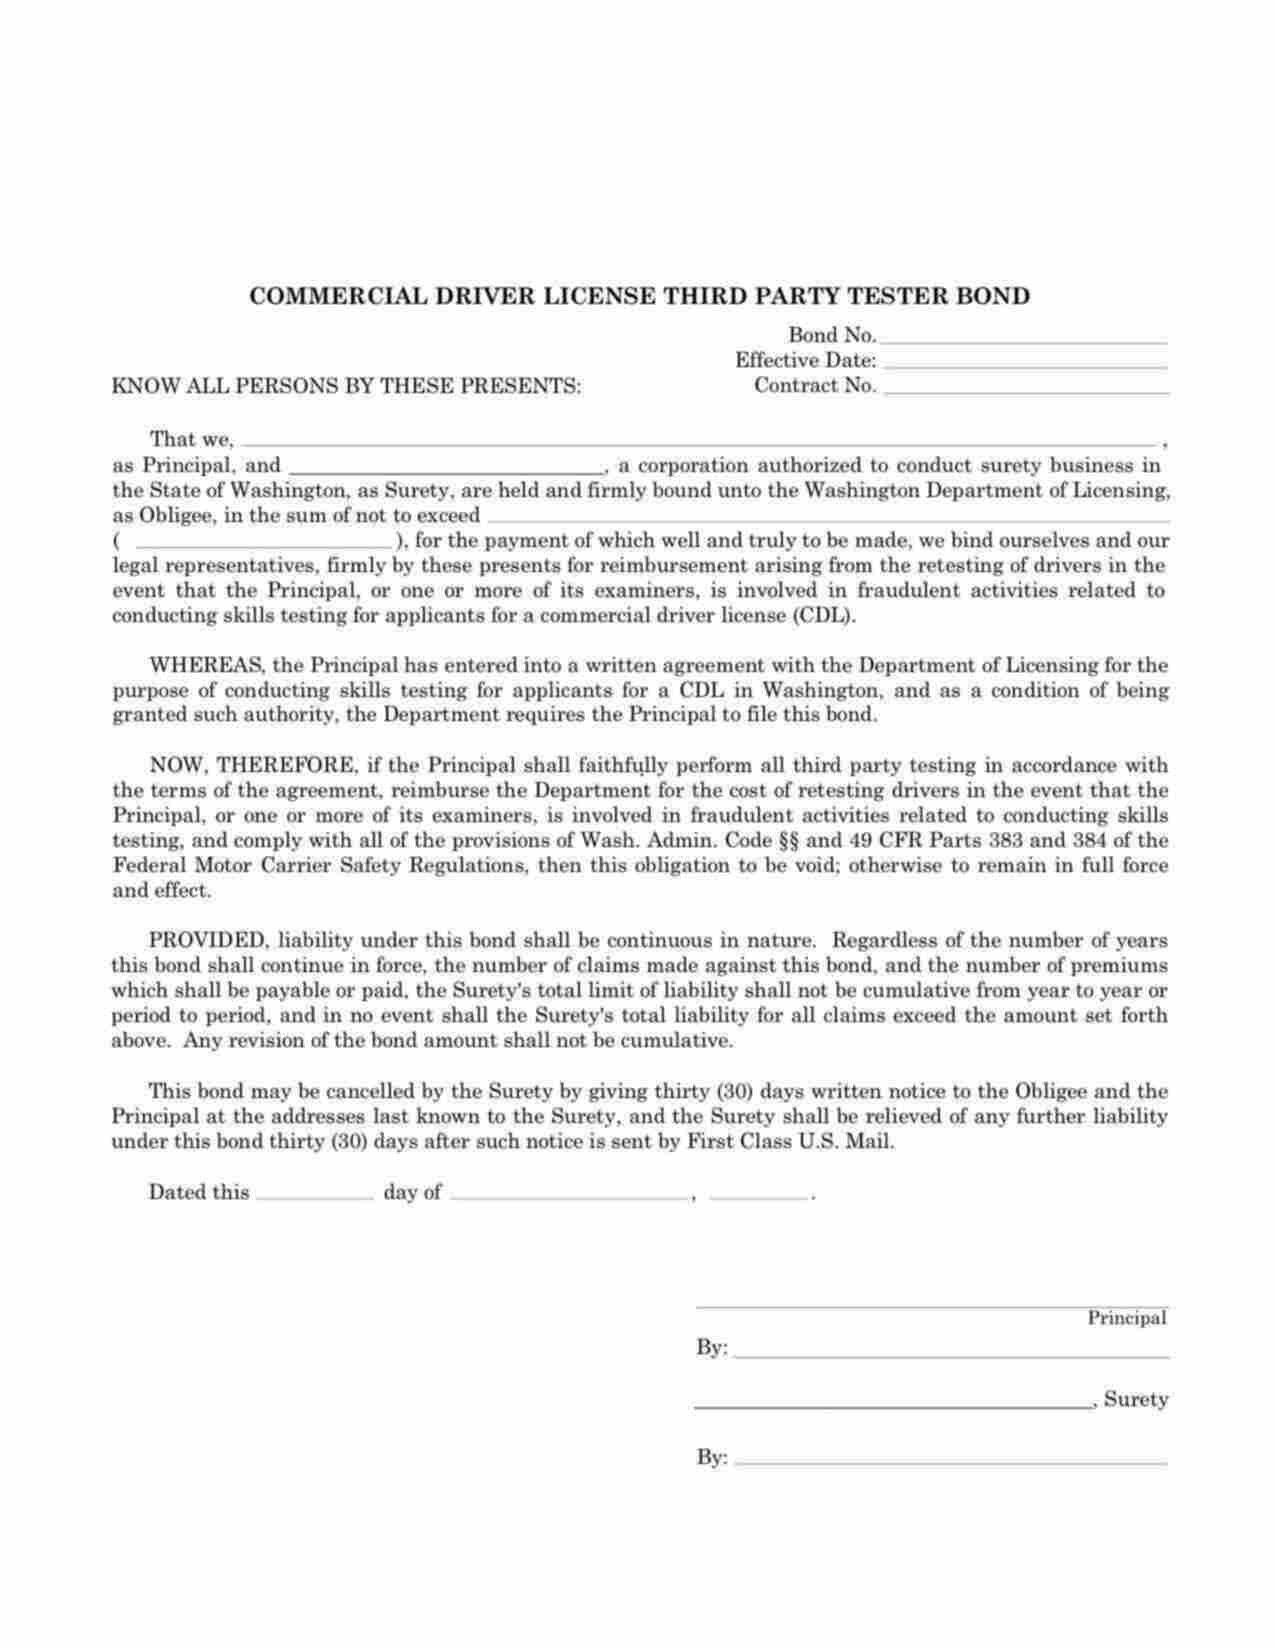 Washington Commercial Driver License (CDL) Third Party Tester Bond Form